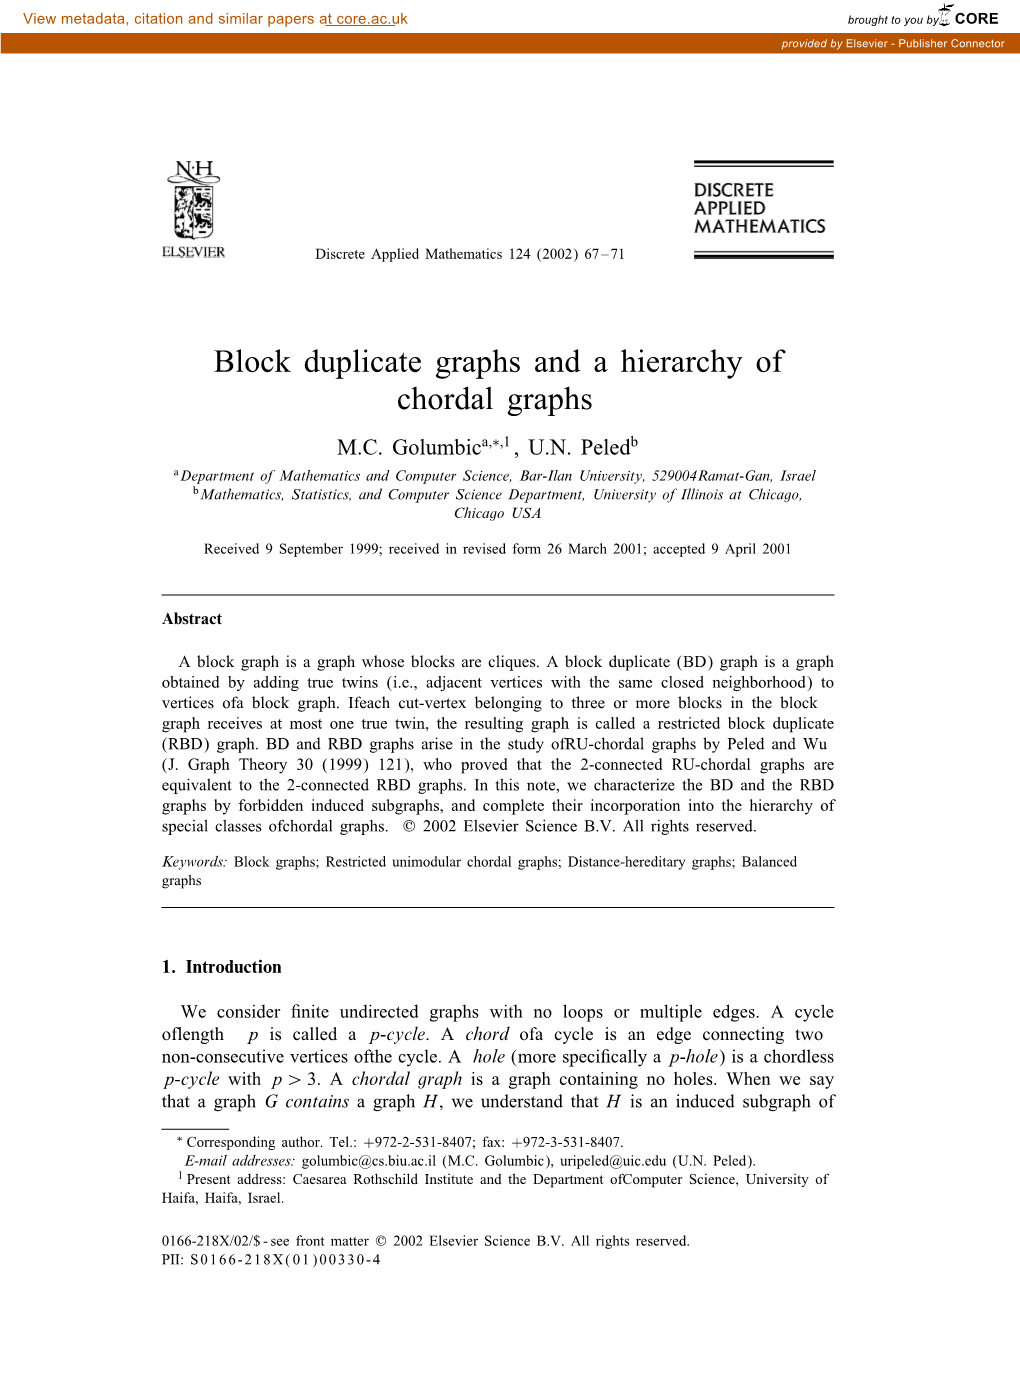 Block Duplicate Graphs and a Hierarchy of Chordal Graphs